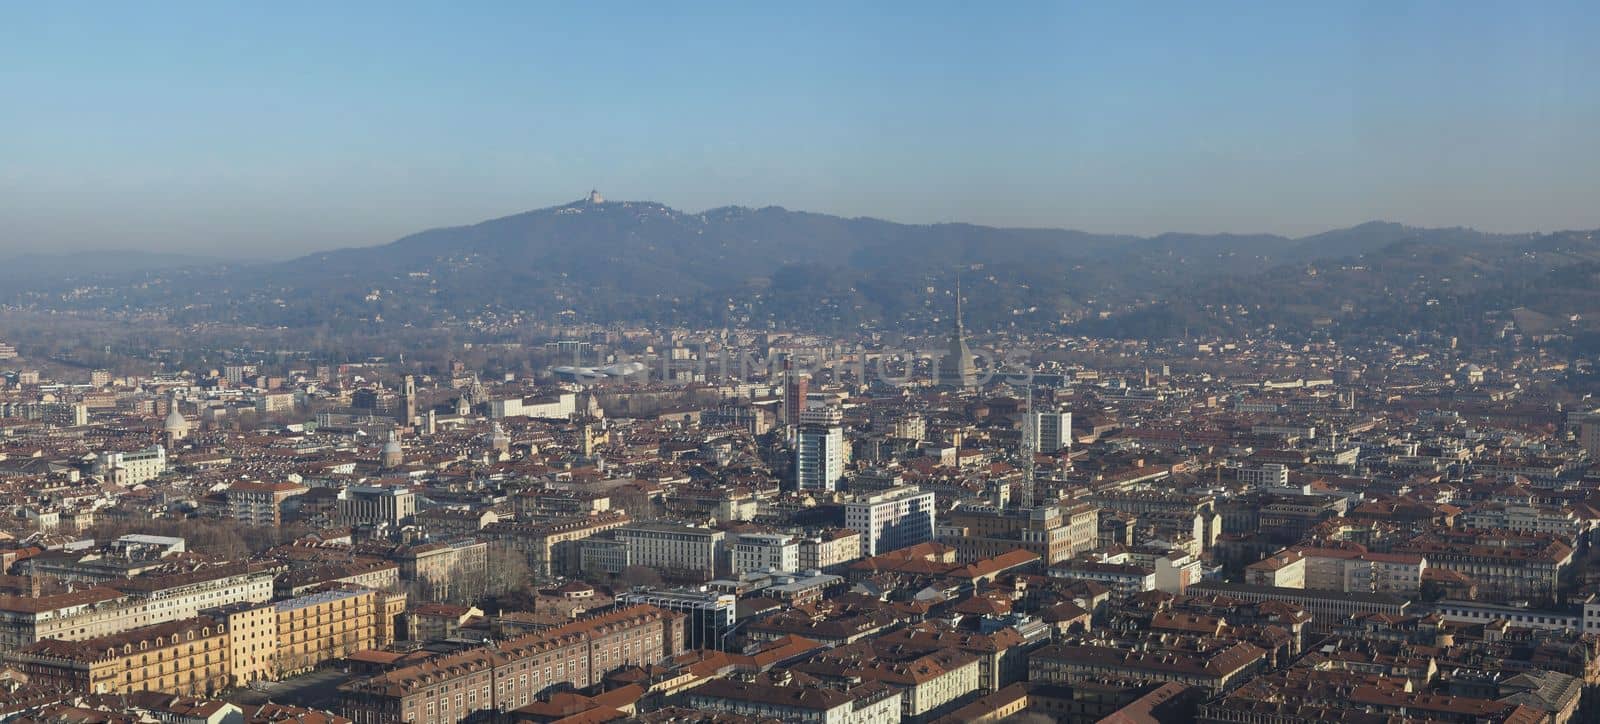 Aerial view of Turin by claudiodivizia